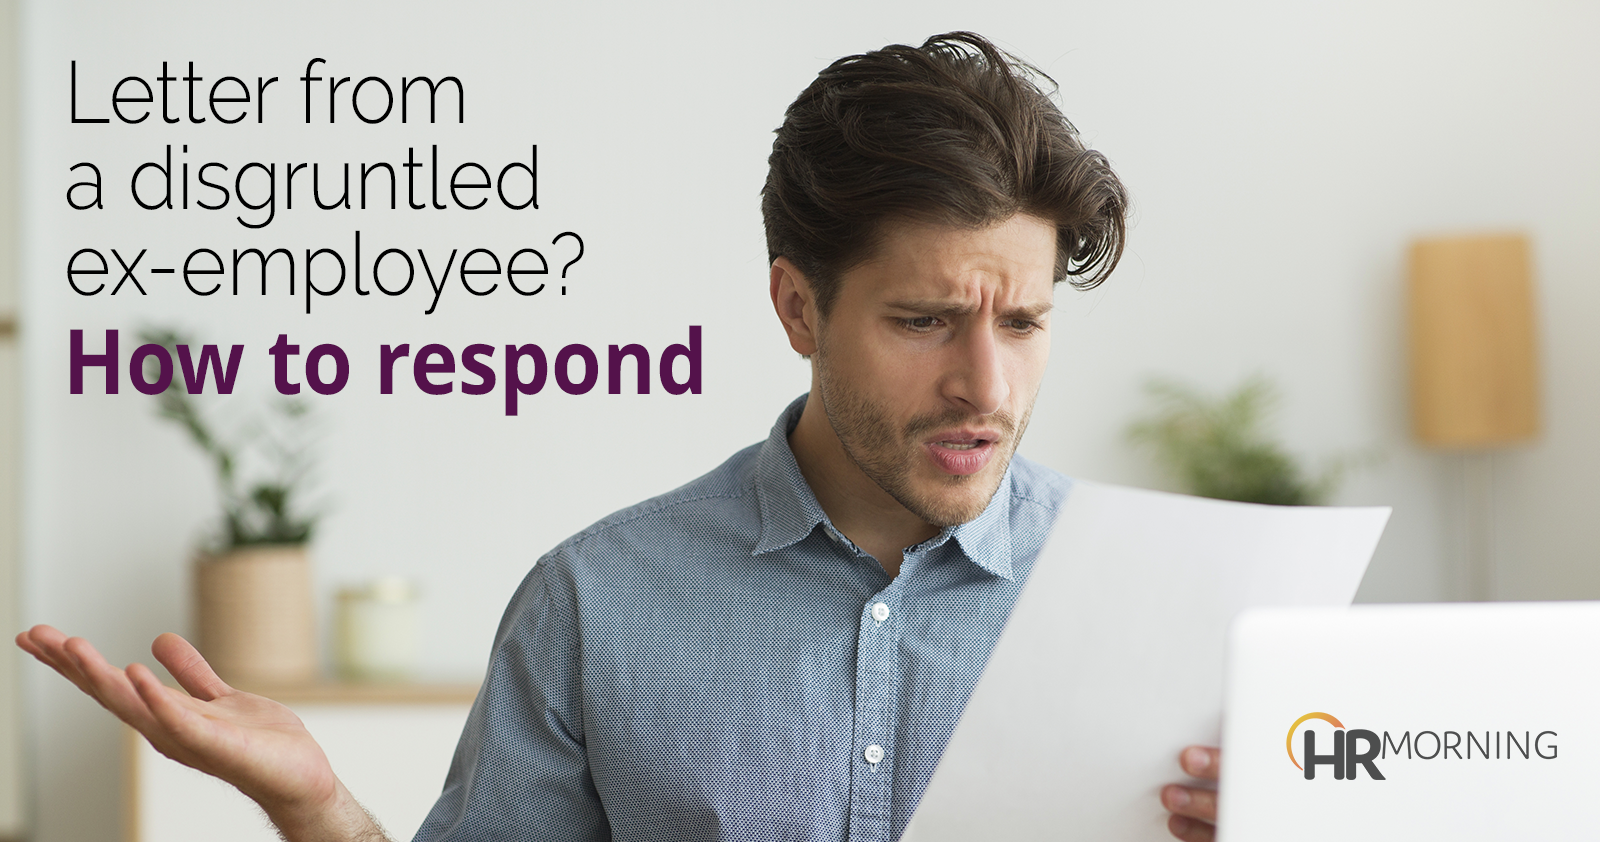 letter from a disgruntled ex-employee how to respond